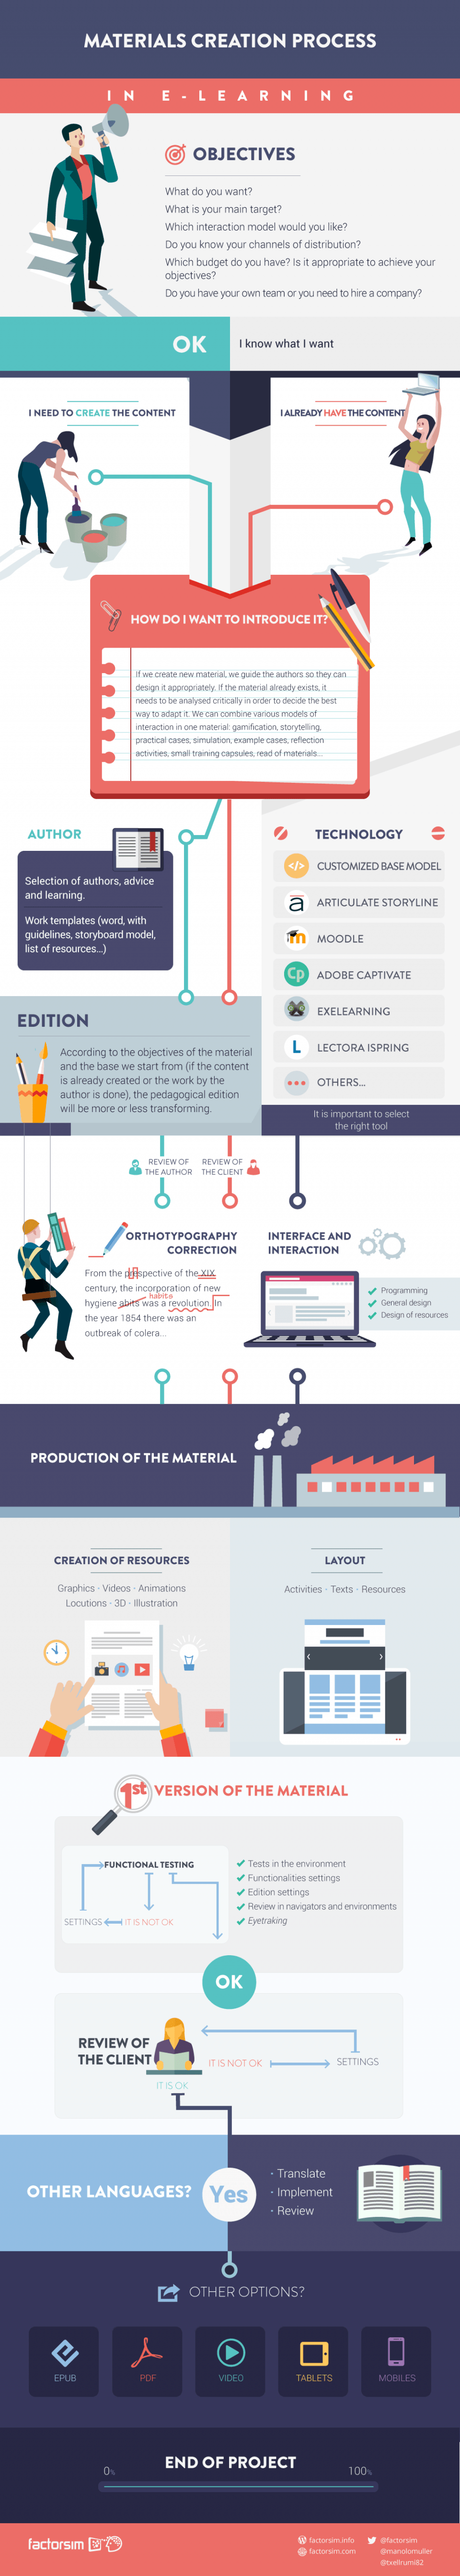 eLearning Materials Creation Process Infographic